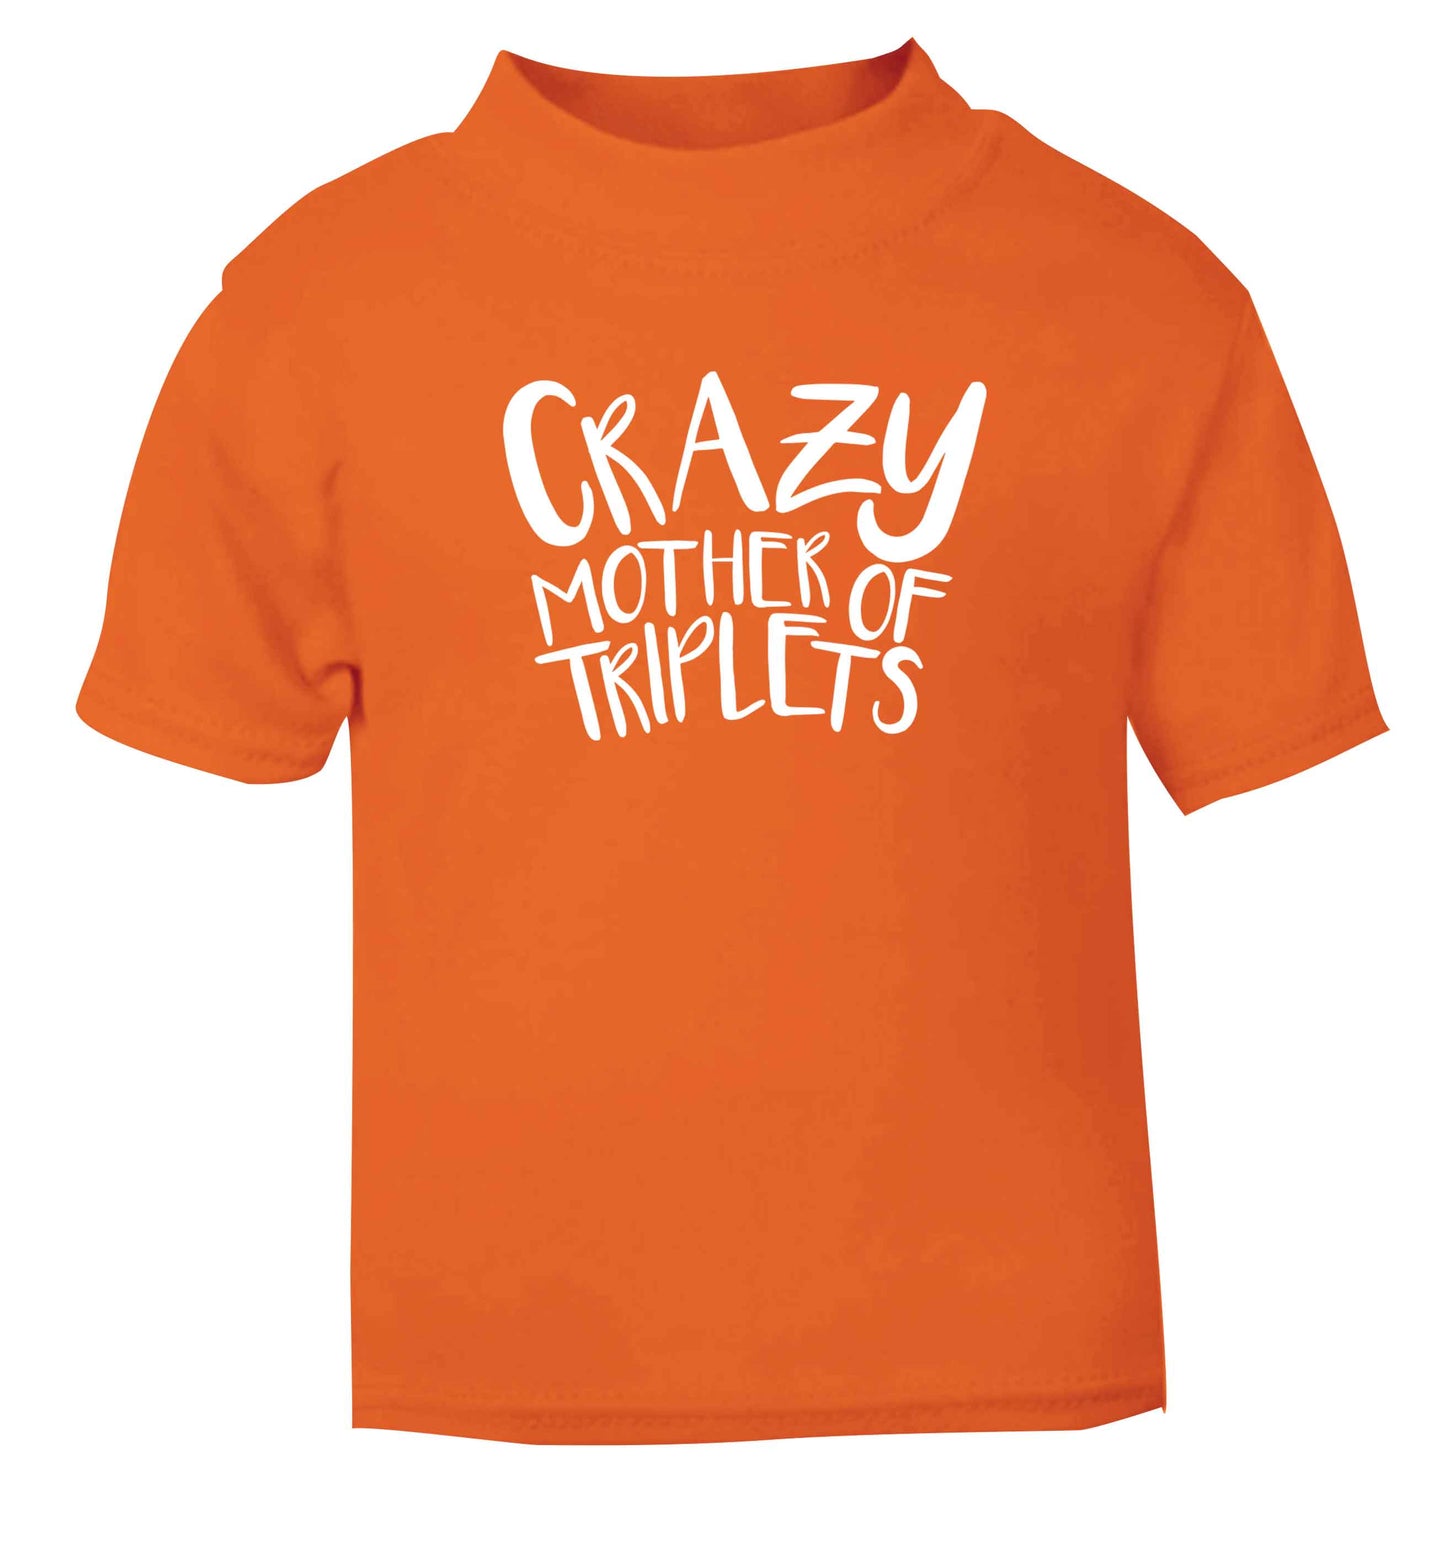 Crazy mother of triplets orange baby toddler Tshirt 2 Years